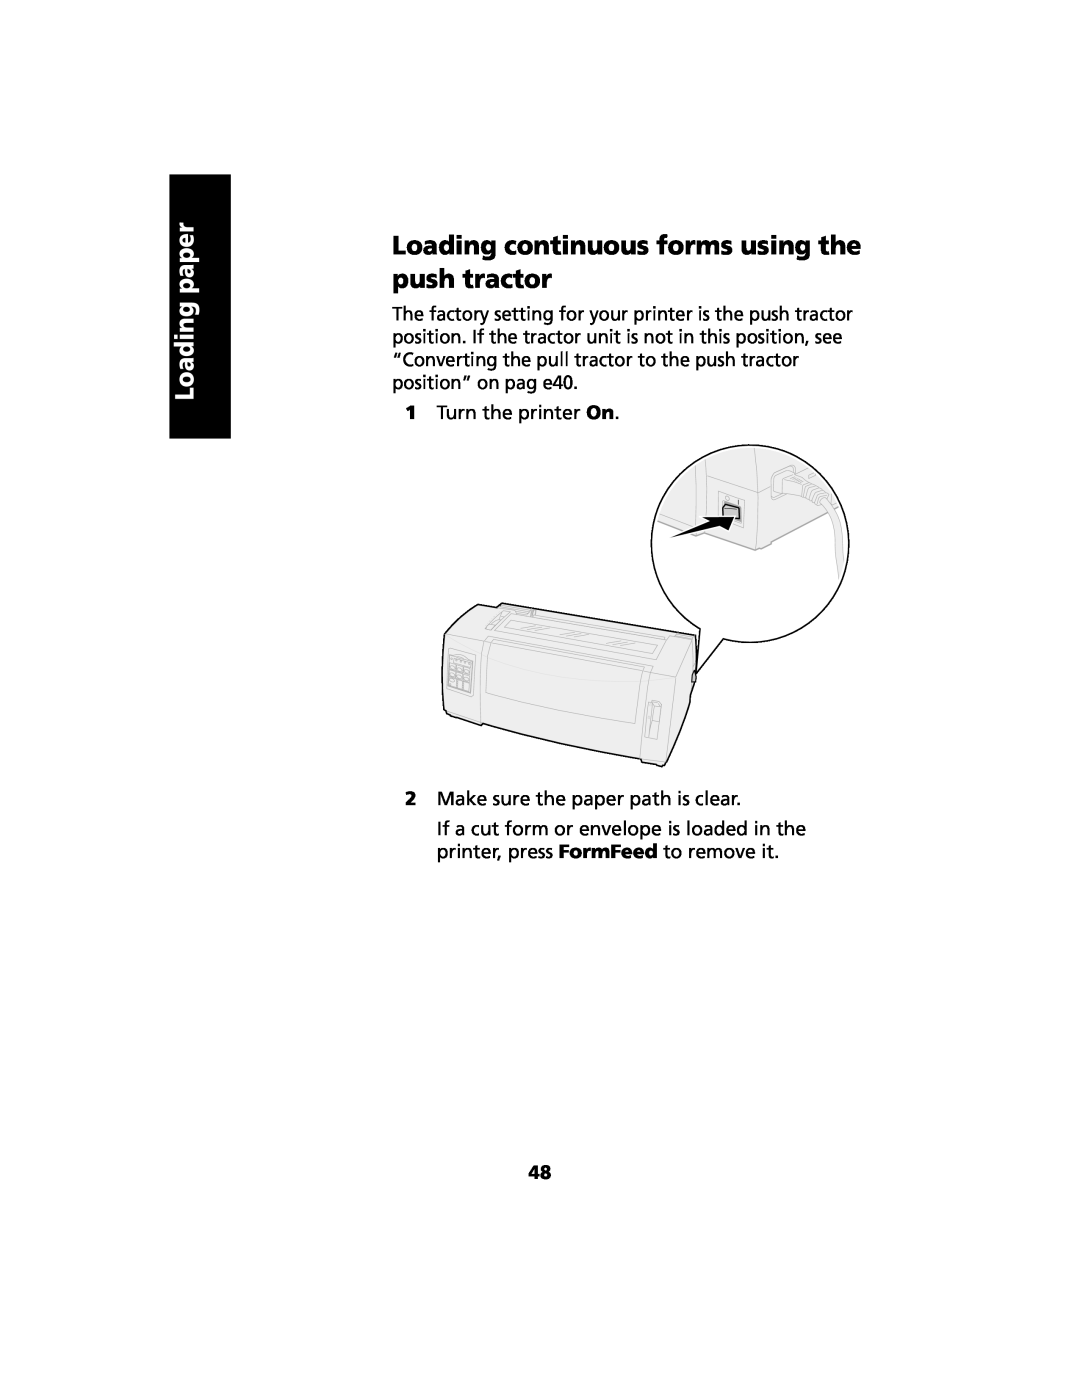 Lexmark 2480 manual Loading continuous forms using the push tractor, Loading paper 